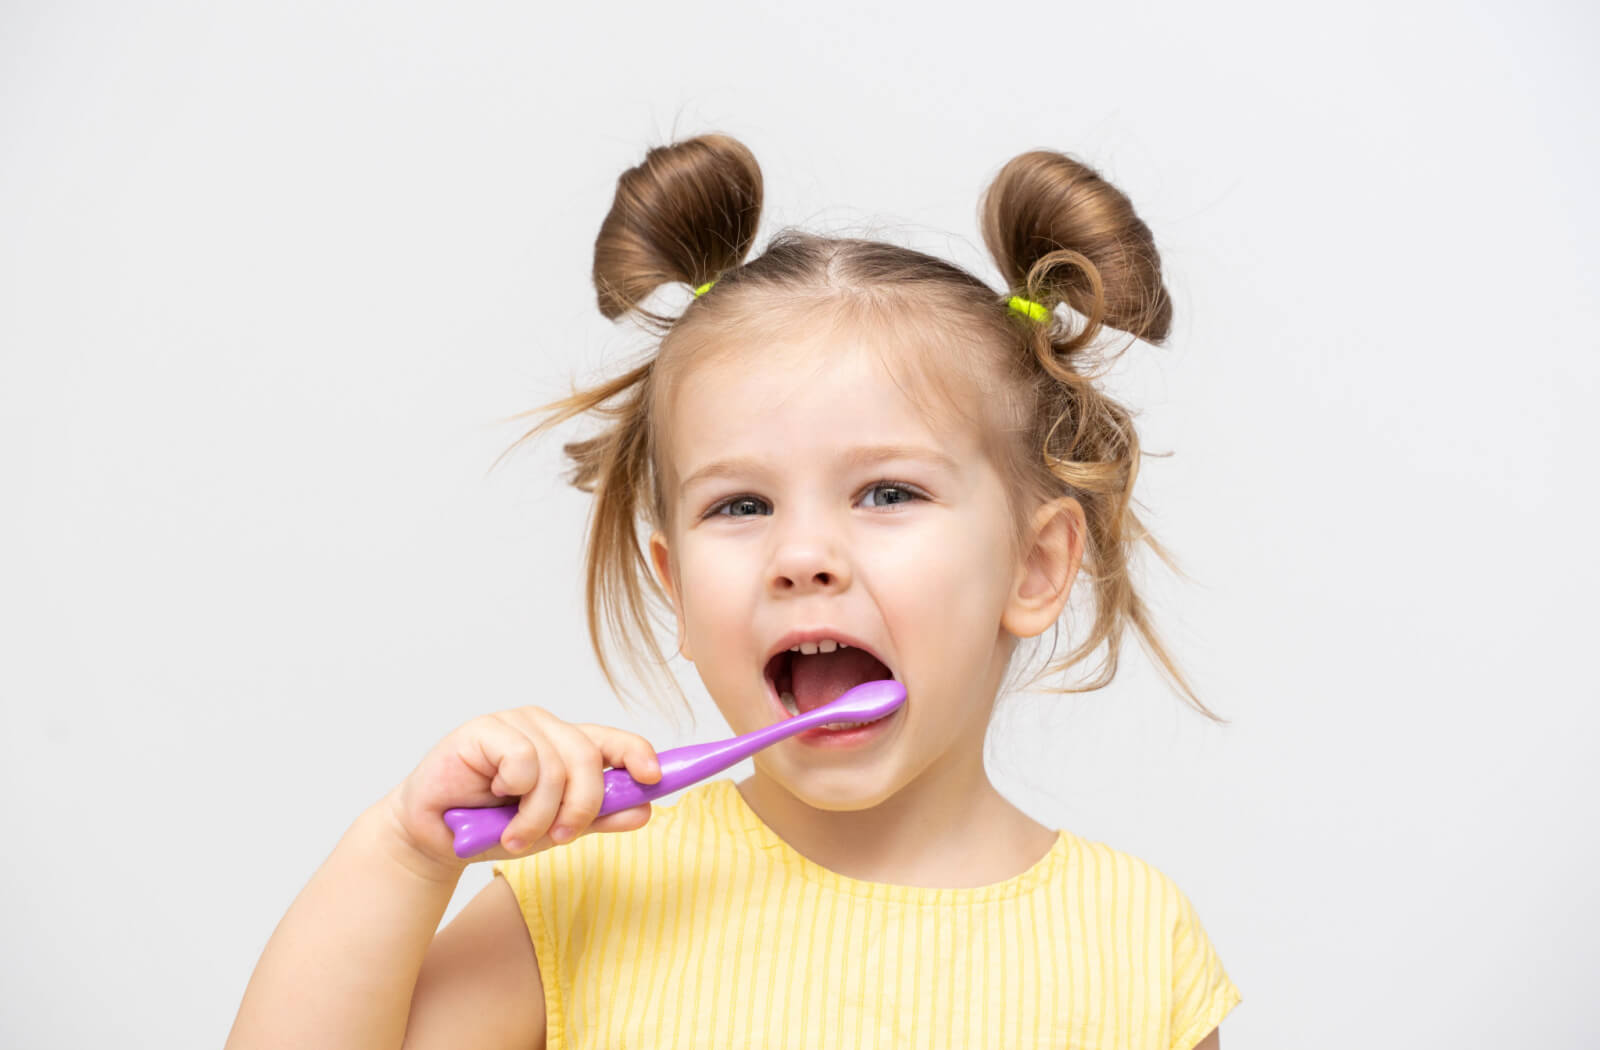 A young girl brushes her teeth with a purple toothbrush to prevent yellowing